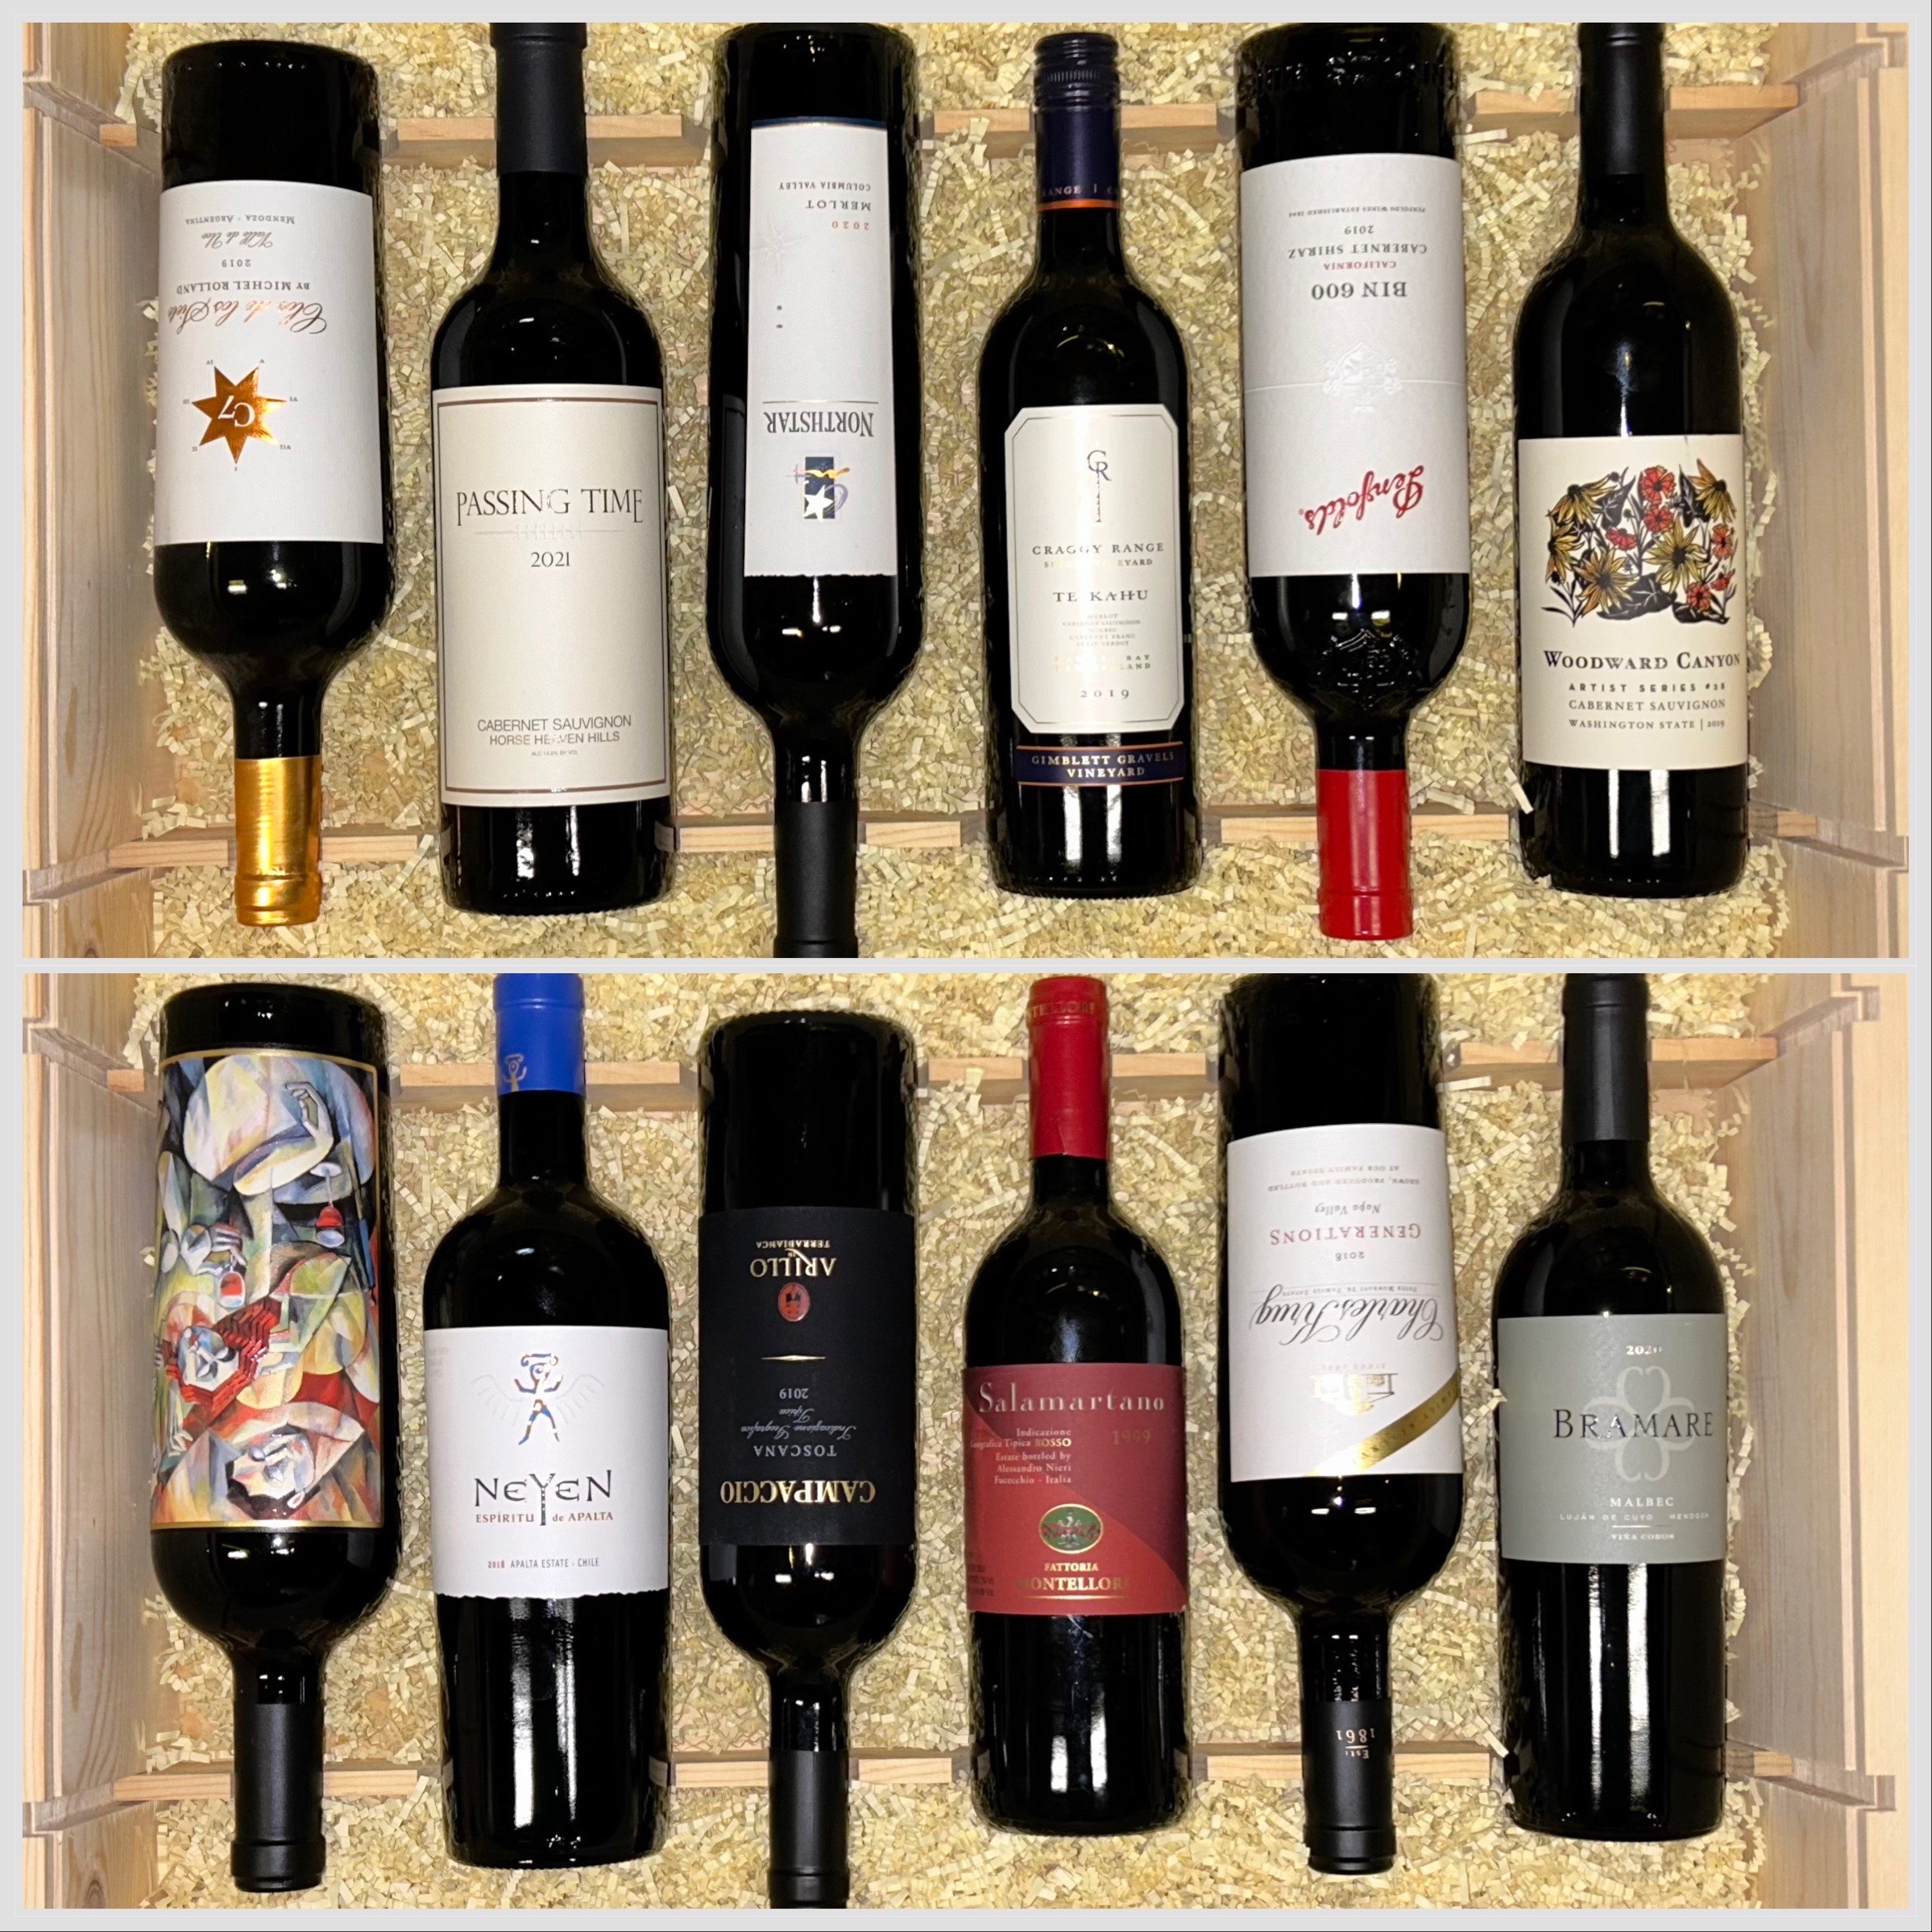 Bordeaux Blends from around the world 12 Bottle Case #23A4 - click image for full description